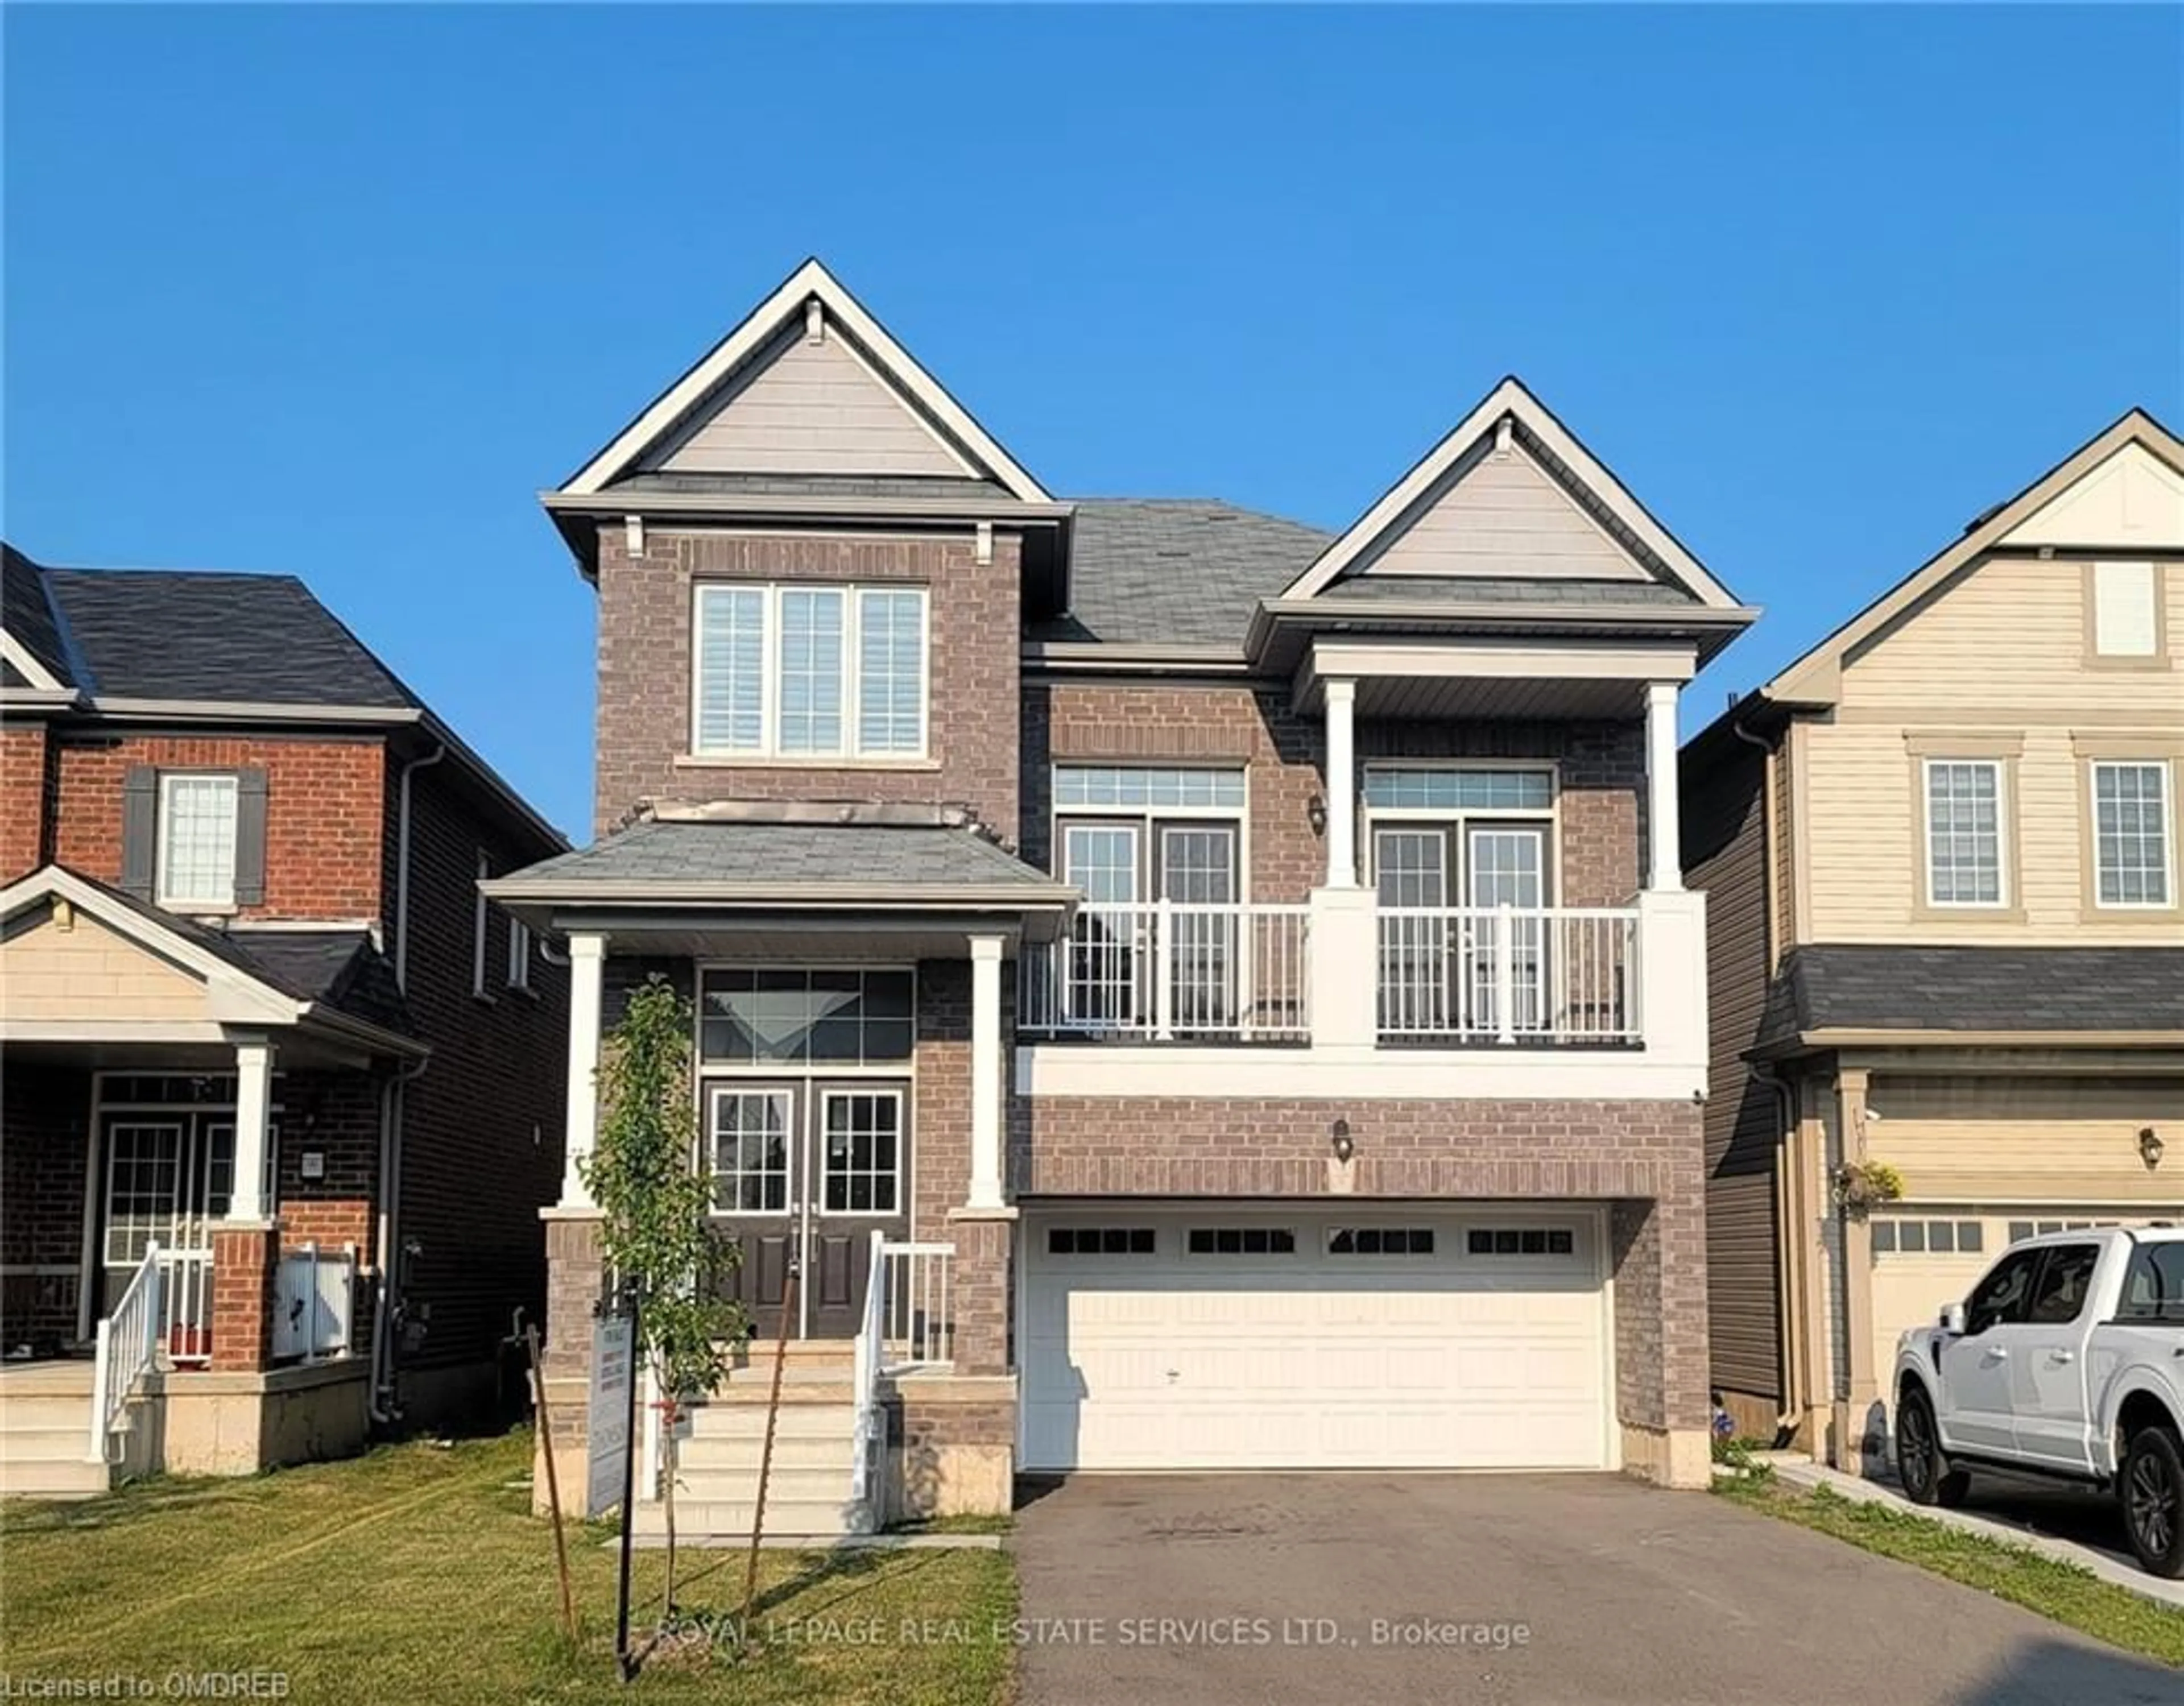 Frontside or backside of a home for 7989 Odell Cres, Niagara Falls Ontario L2H 3R7